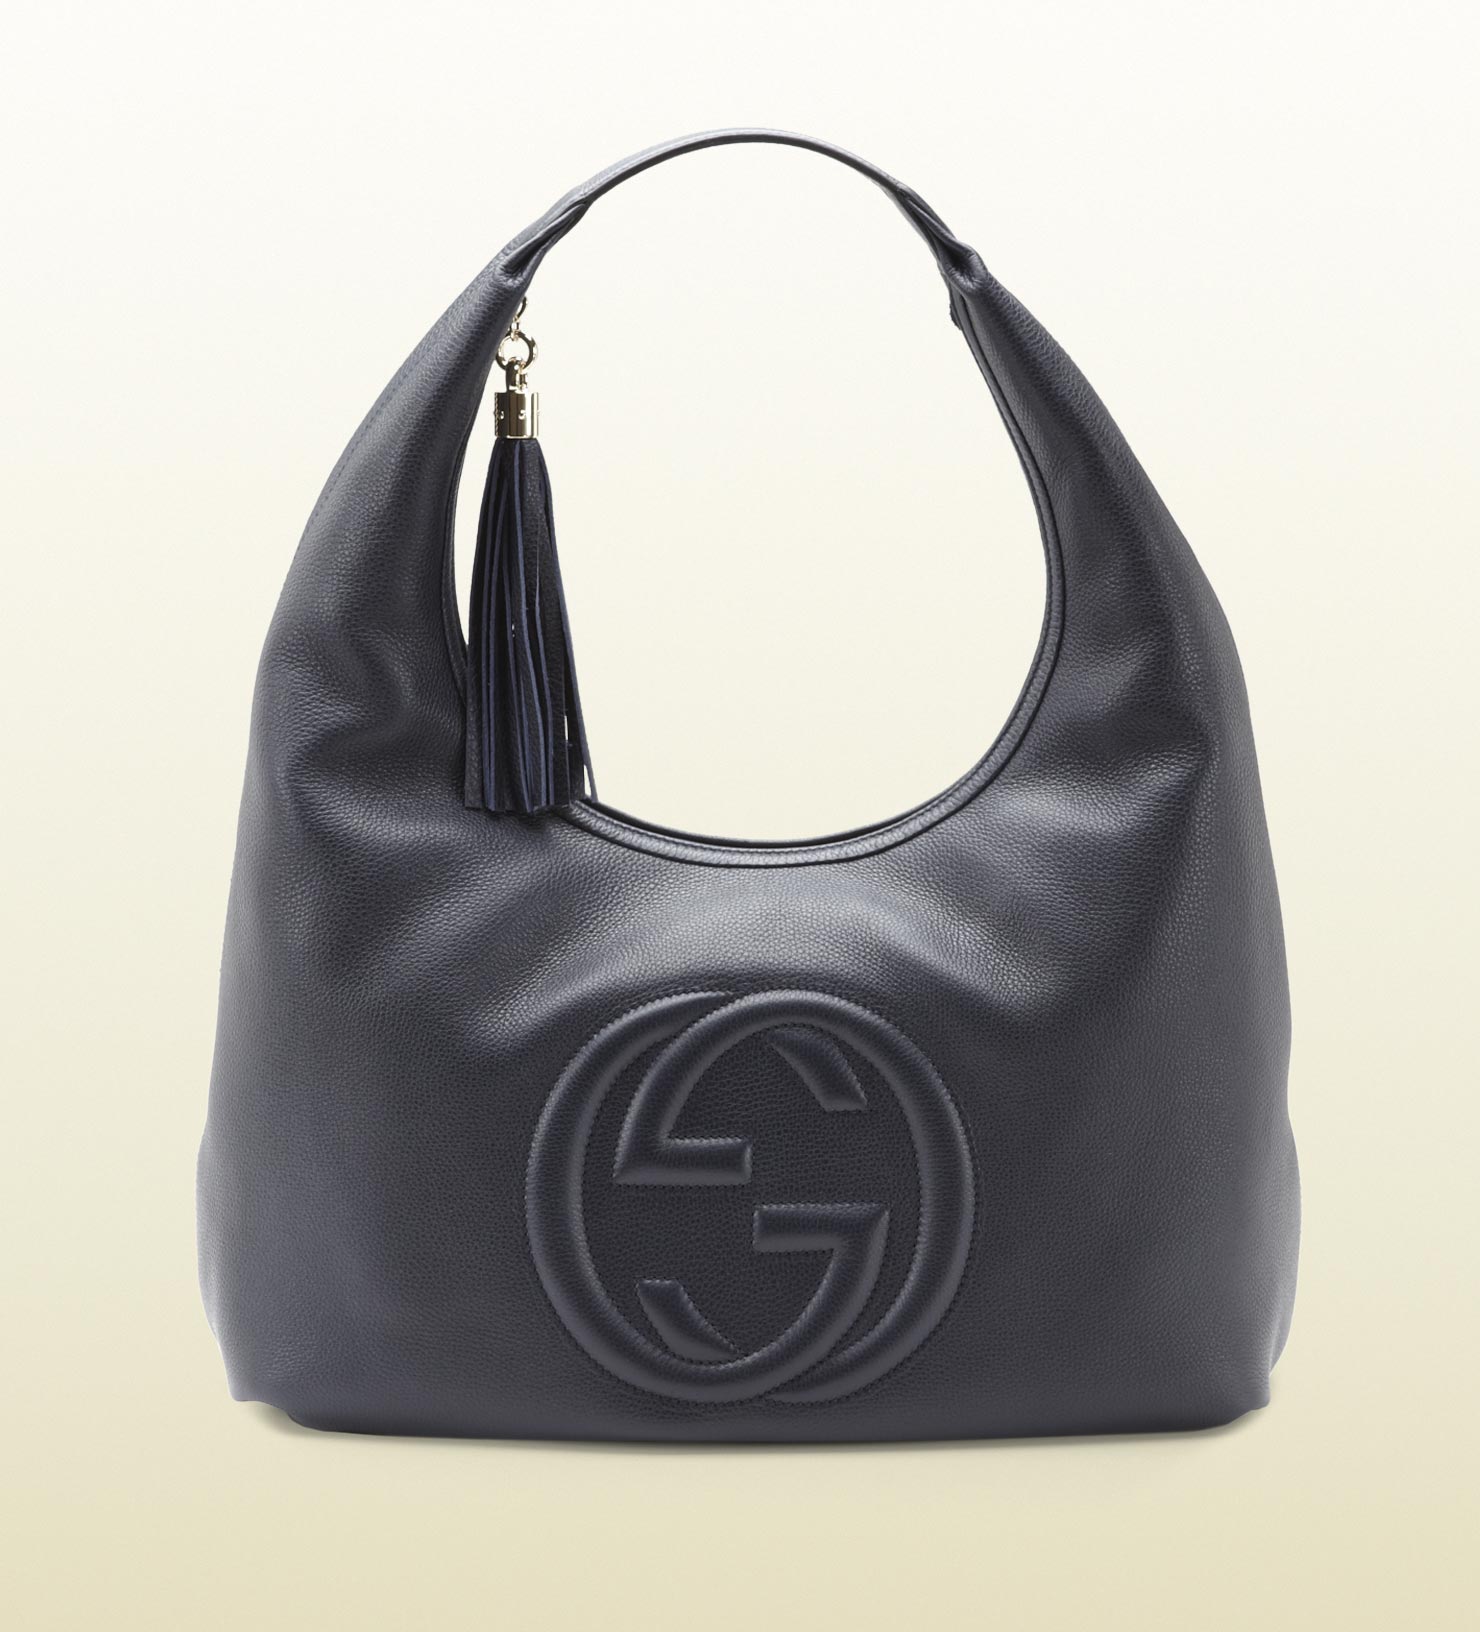 Lyst - Gucci Soho Blue Leather Hobo in Blue